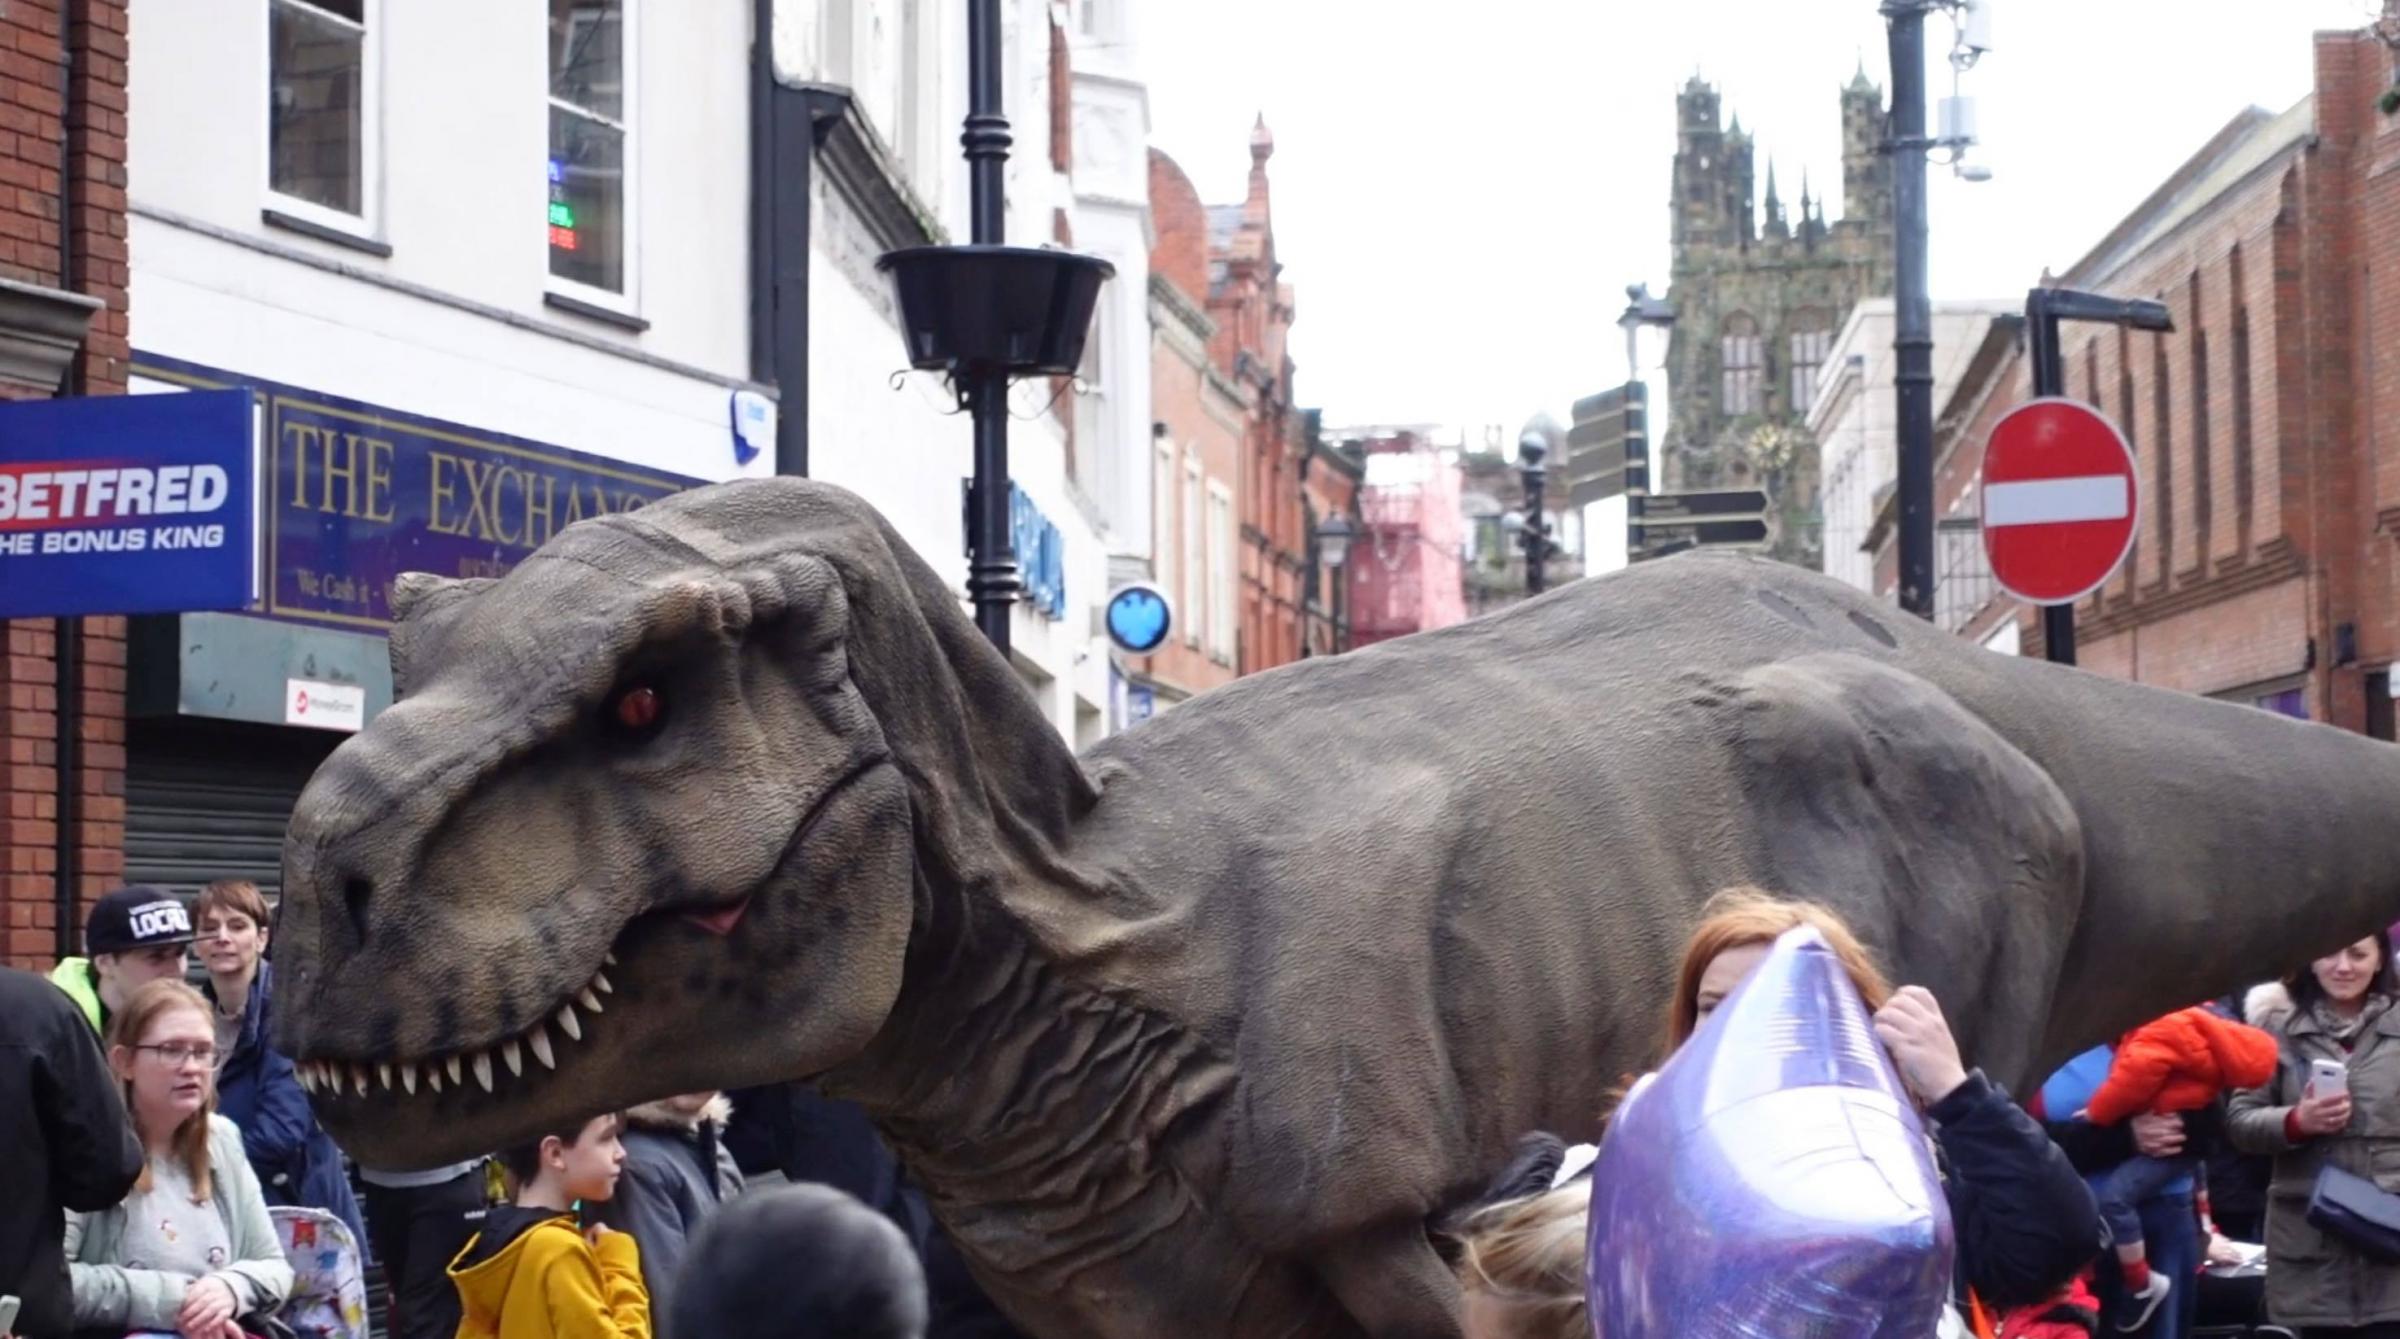 73 Degree Films go behind the scenes of Jurassic Live in Wrexham.